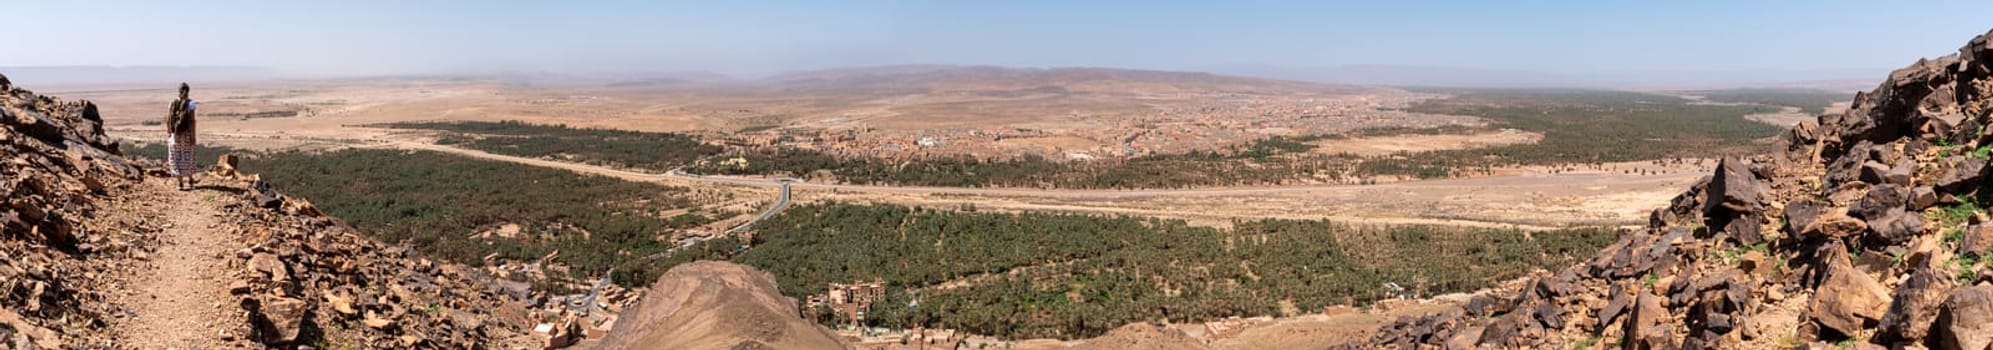 Magnificent panoramic view from Mount Zagora into the Draa valley, Morocco